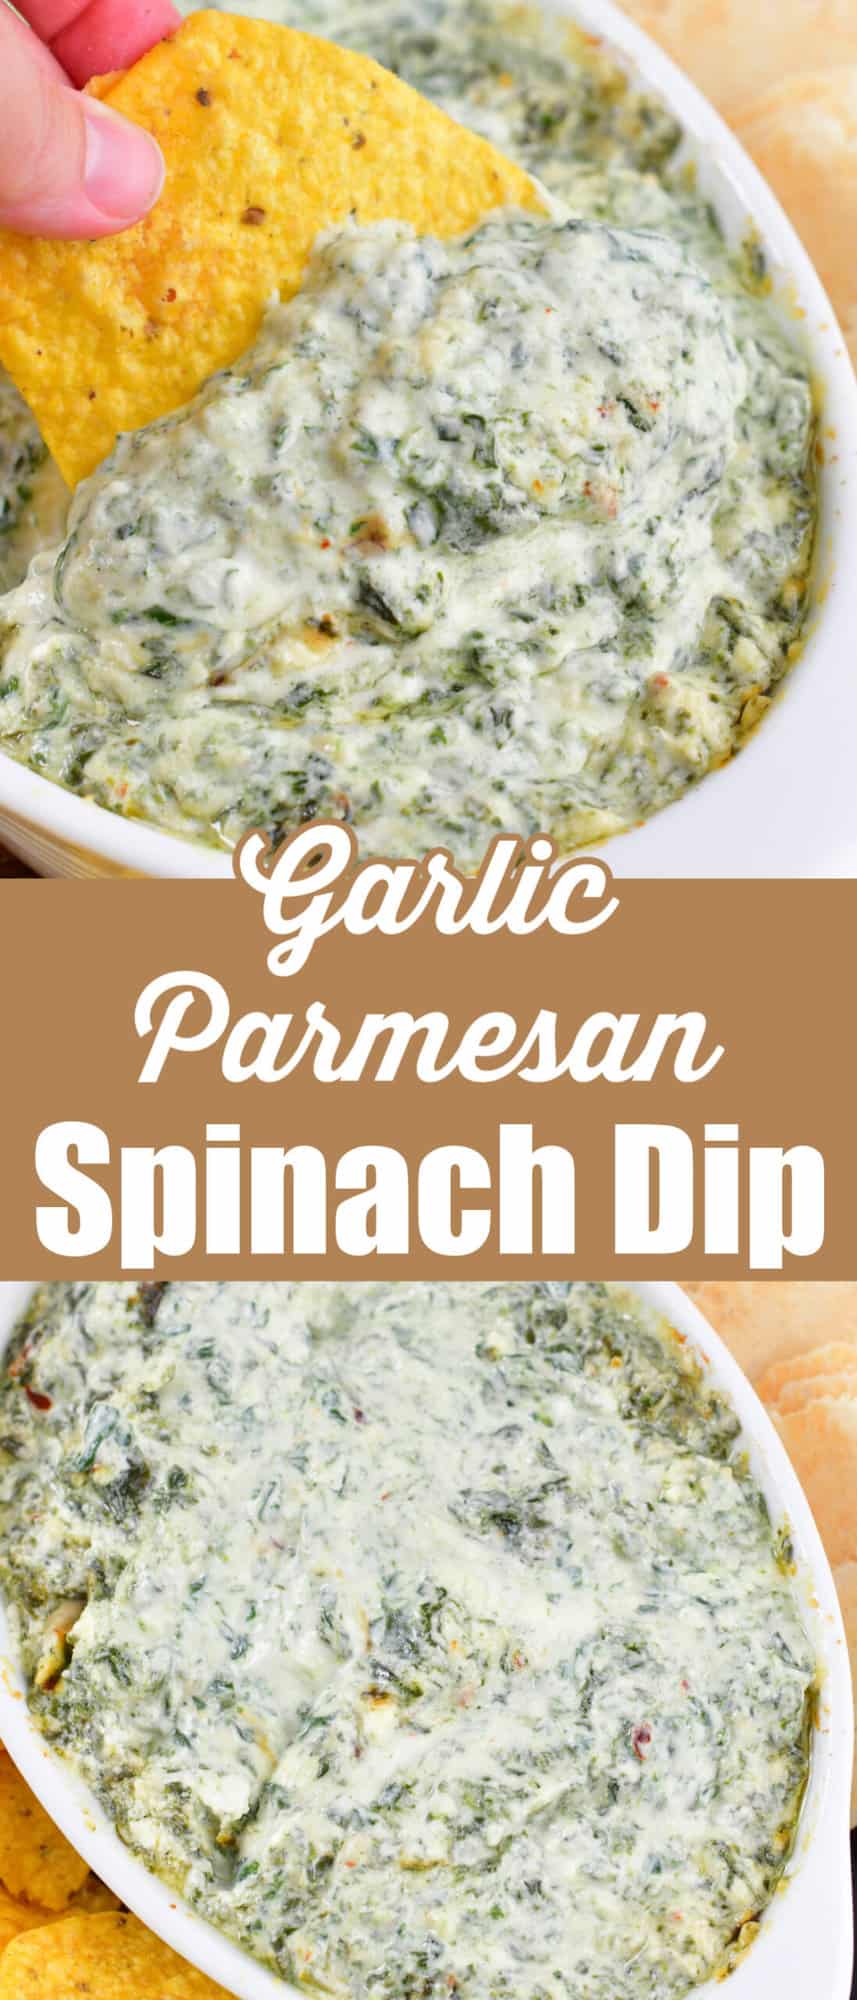 collage of closeup images of spinach dip in a bowl.